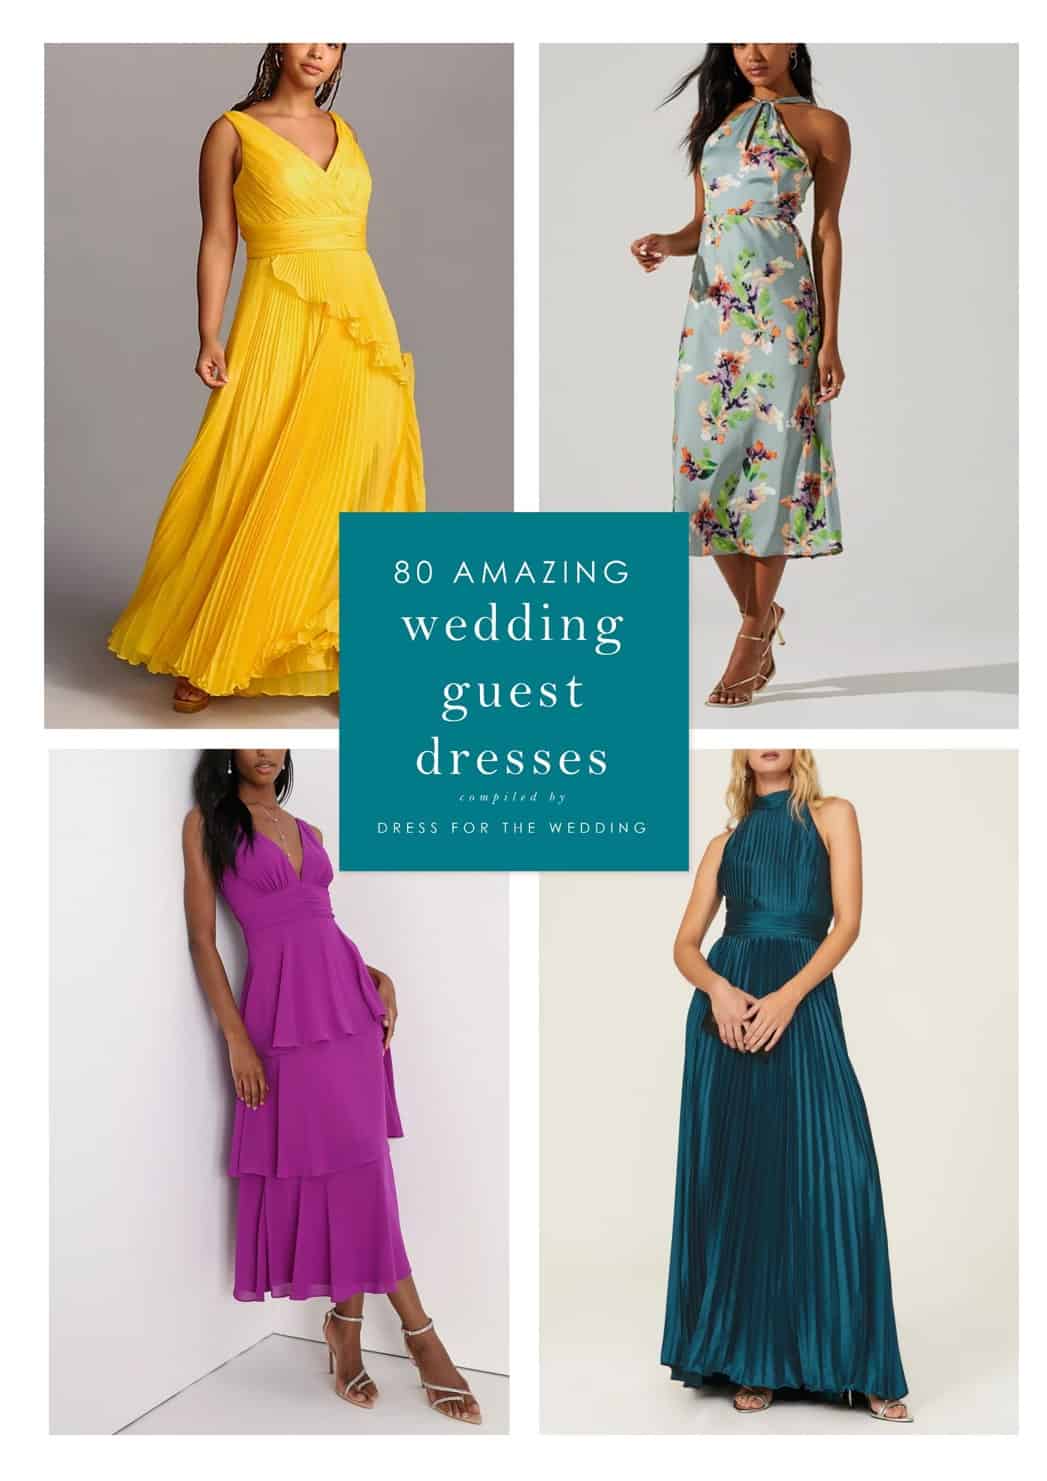 Off Shoulder African Mermaid Full Sleeve Bridesmaid Dresses With Long  Sleeves Affordable Wedding Guest & Formal Attire From Dresstop, $71.33 |  DHgate.Com